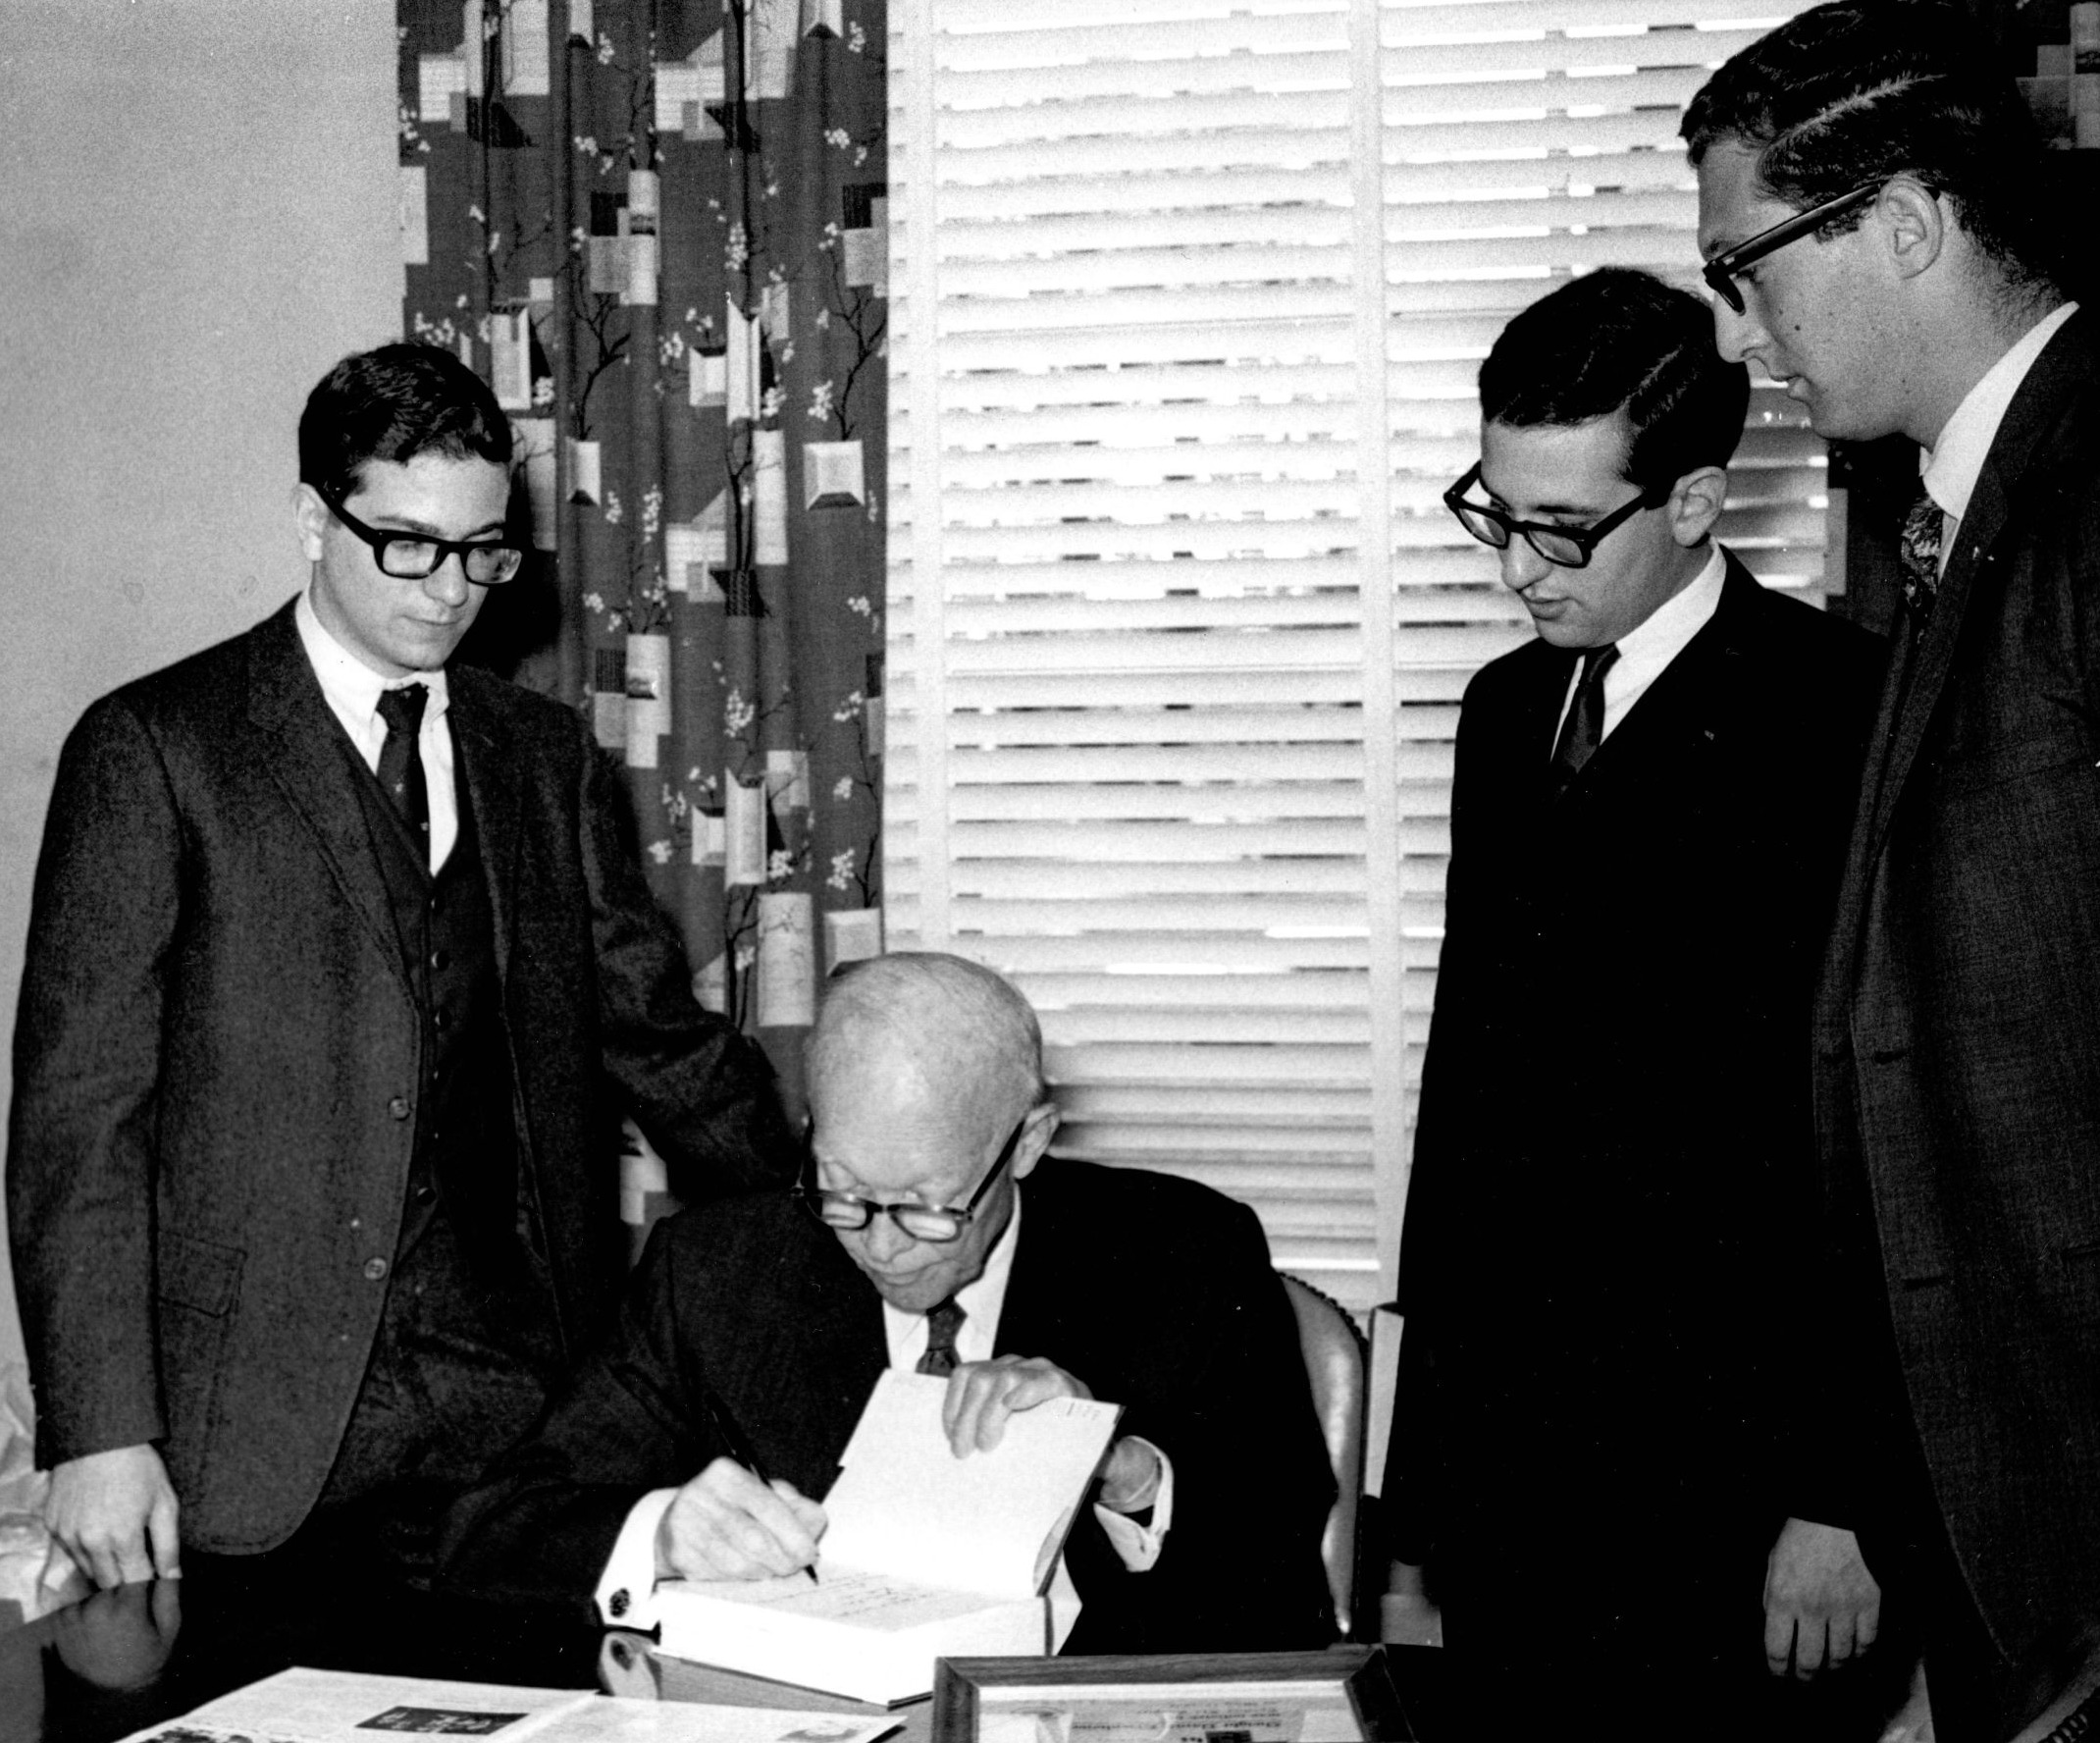  Dwight D. Eisenhower with Stan Abramson, Mike MarkowicH and Jeff Steinhorn while being presented Tau Epsilon Phi Distinguished American Award in 1967. Photo courtesy University Archives.